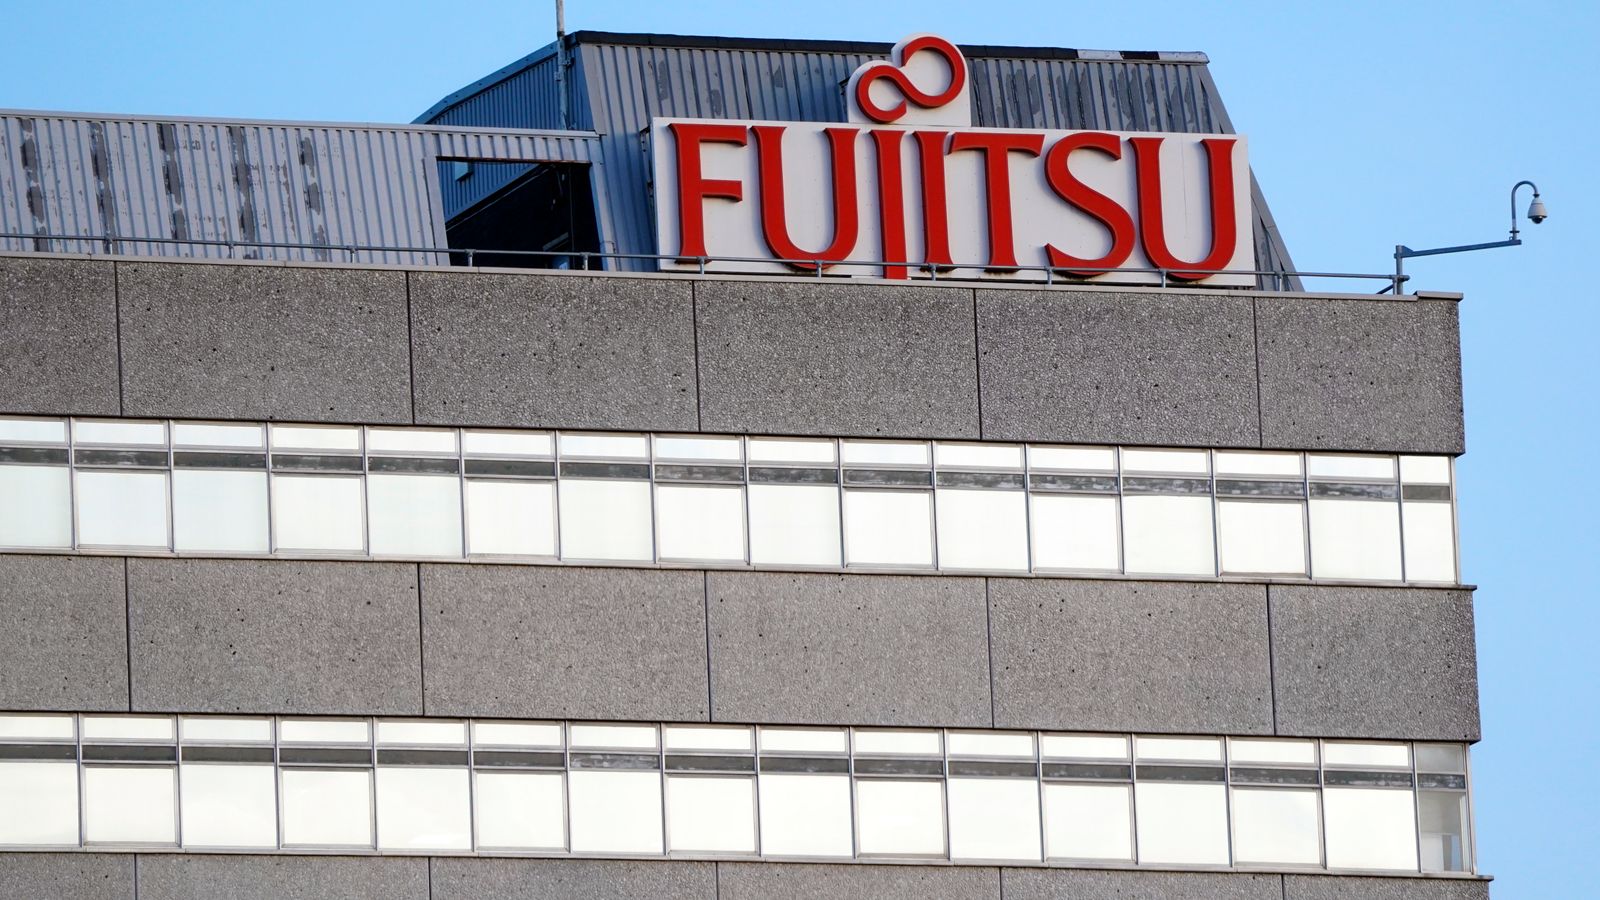 fujitsu 'to have received £3.4bn in treasury-linked deals since 2019' despite role in post office scandal